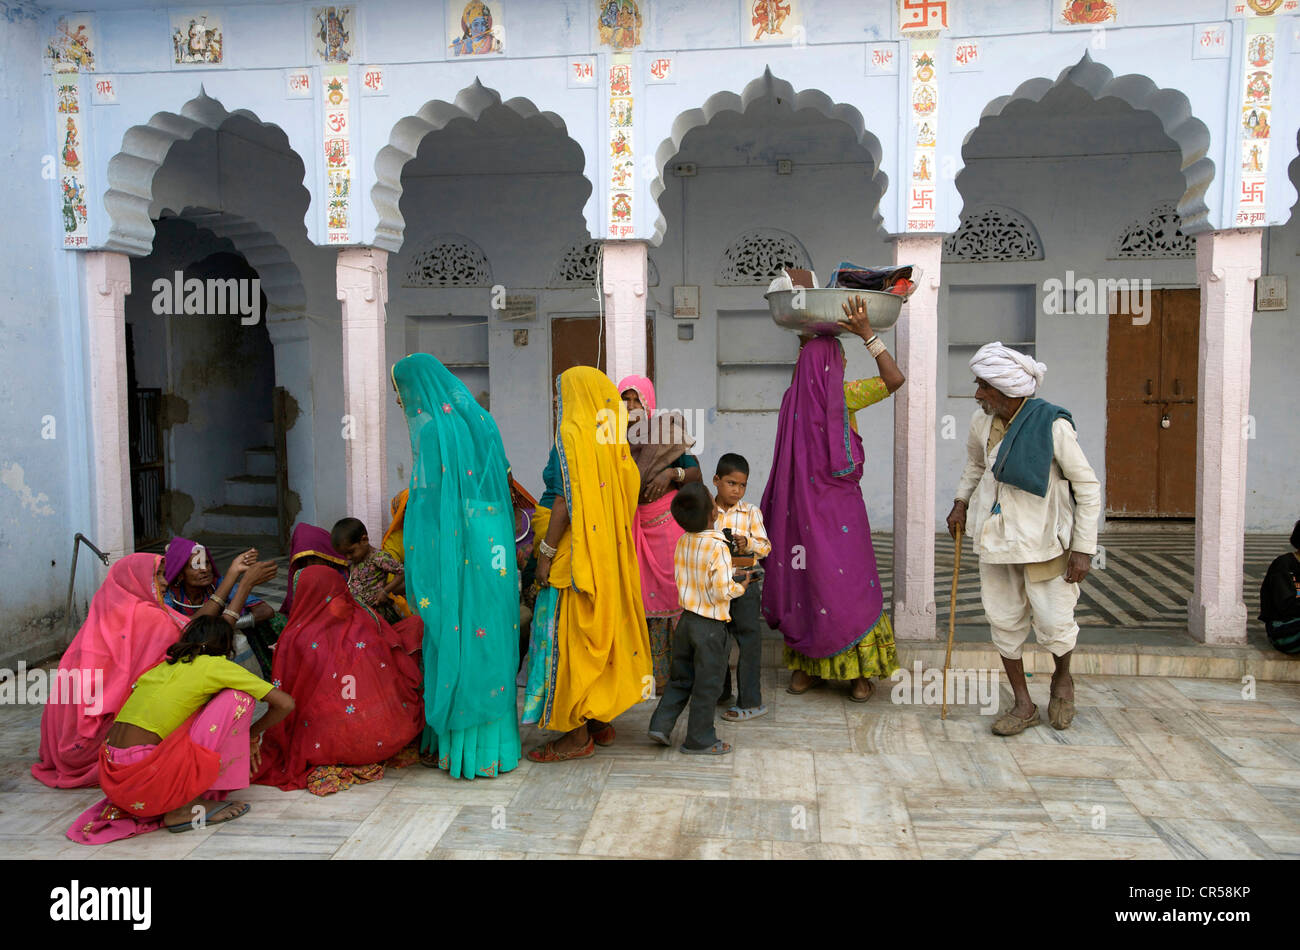 India, Rajasthan State, Pushkar, people grouping in a Hindu temple during the Pushkar Fair Stock Photo